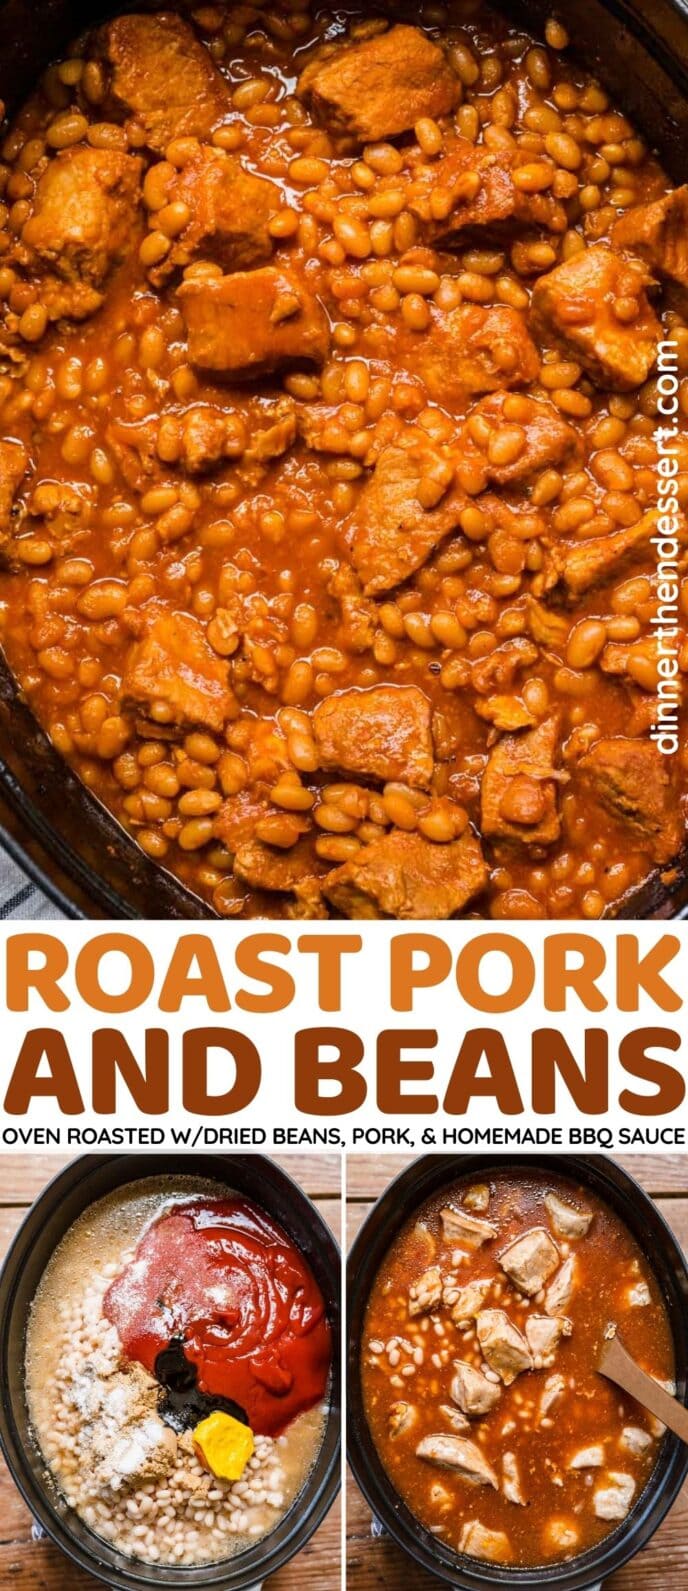 Roast Pork and Beans in baking dish cooked and preparation collage